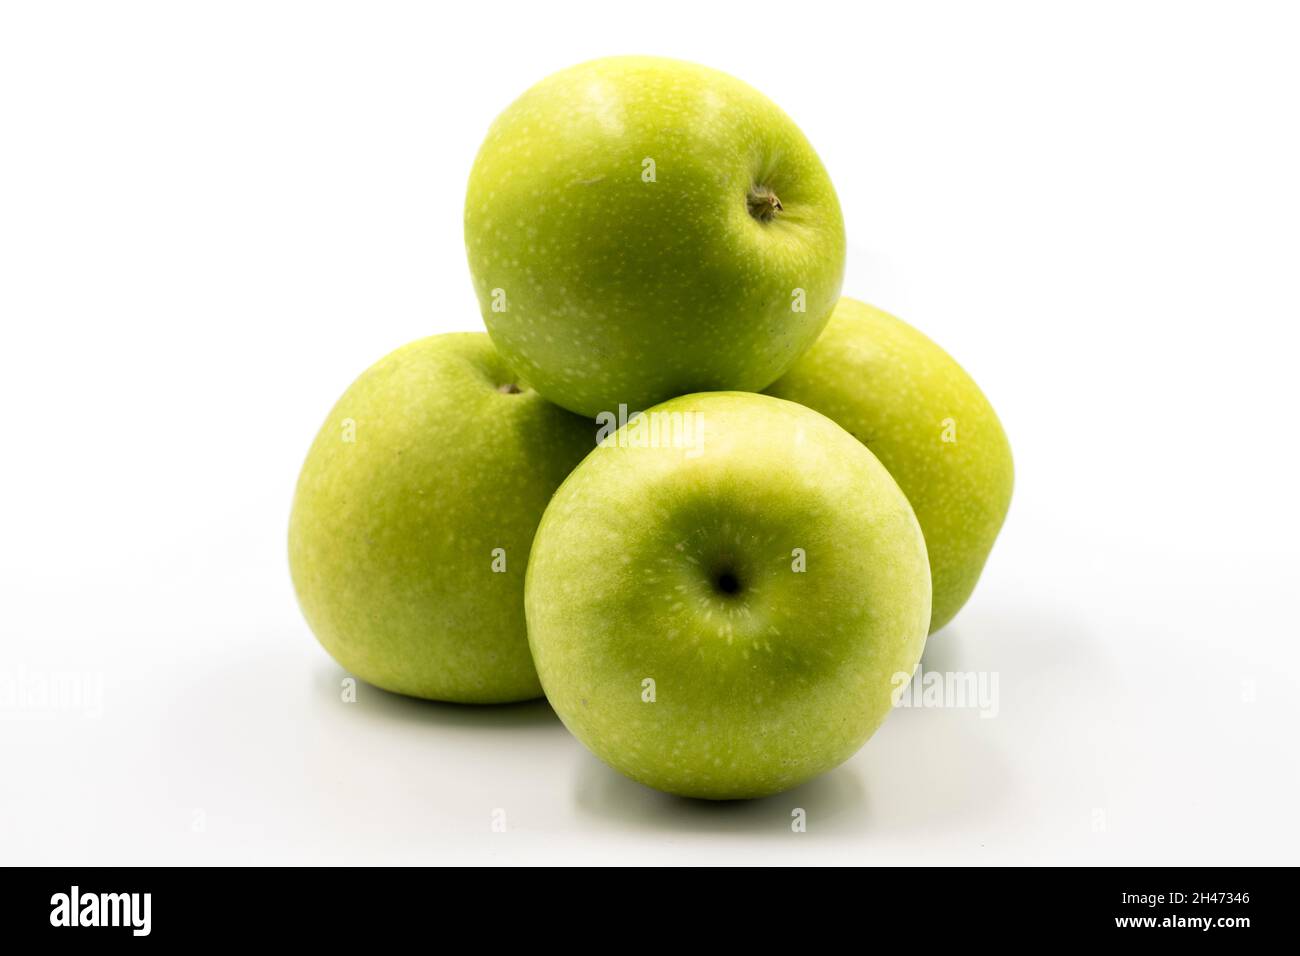 Sour apples on a white background. Ripe Green combined with a shade of sour apple. close up Stock Photo